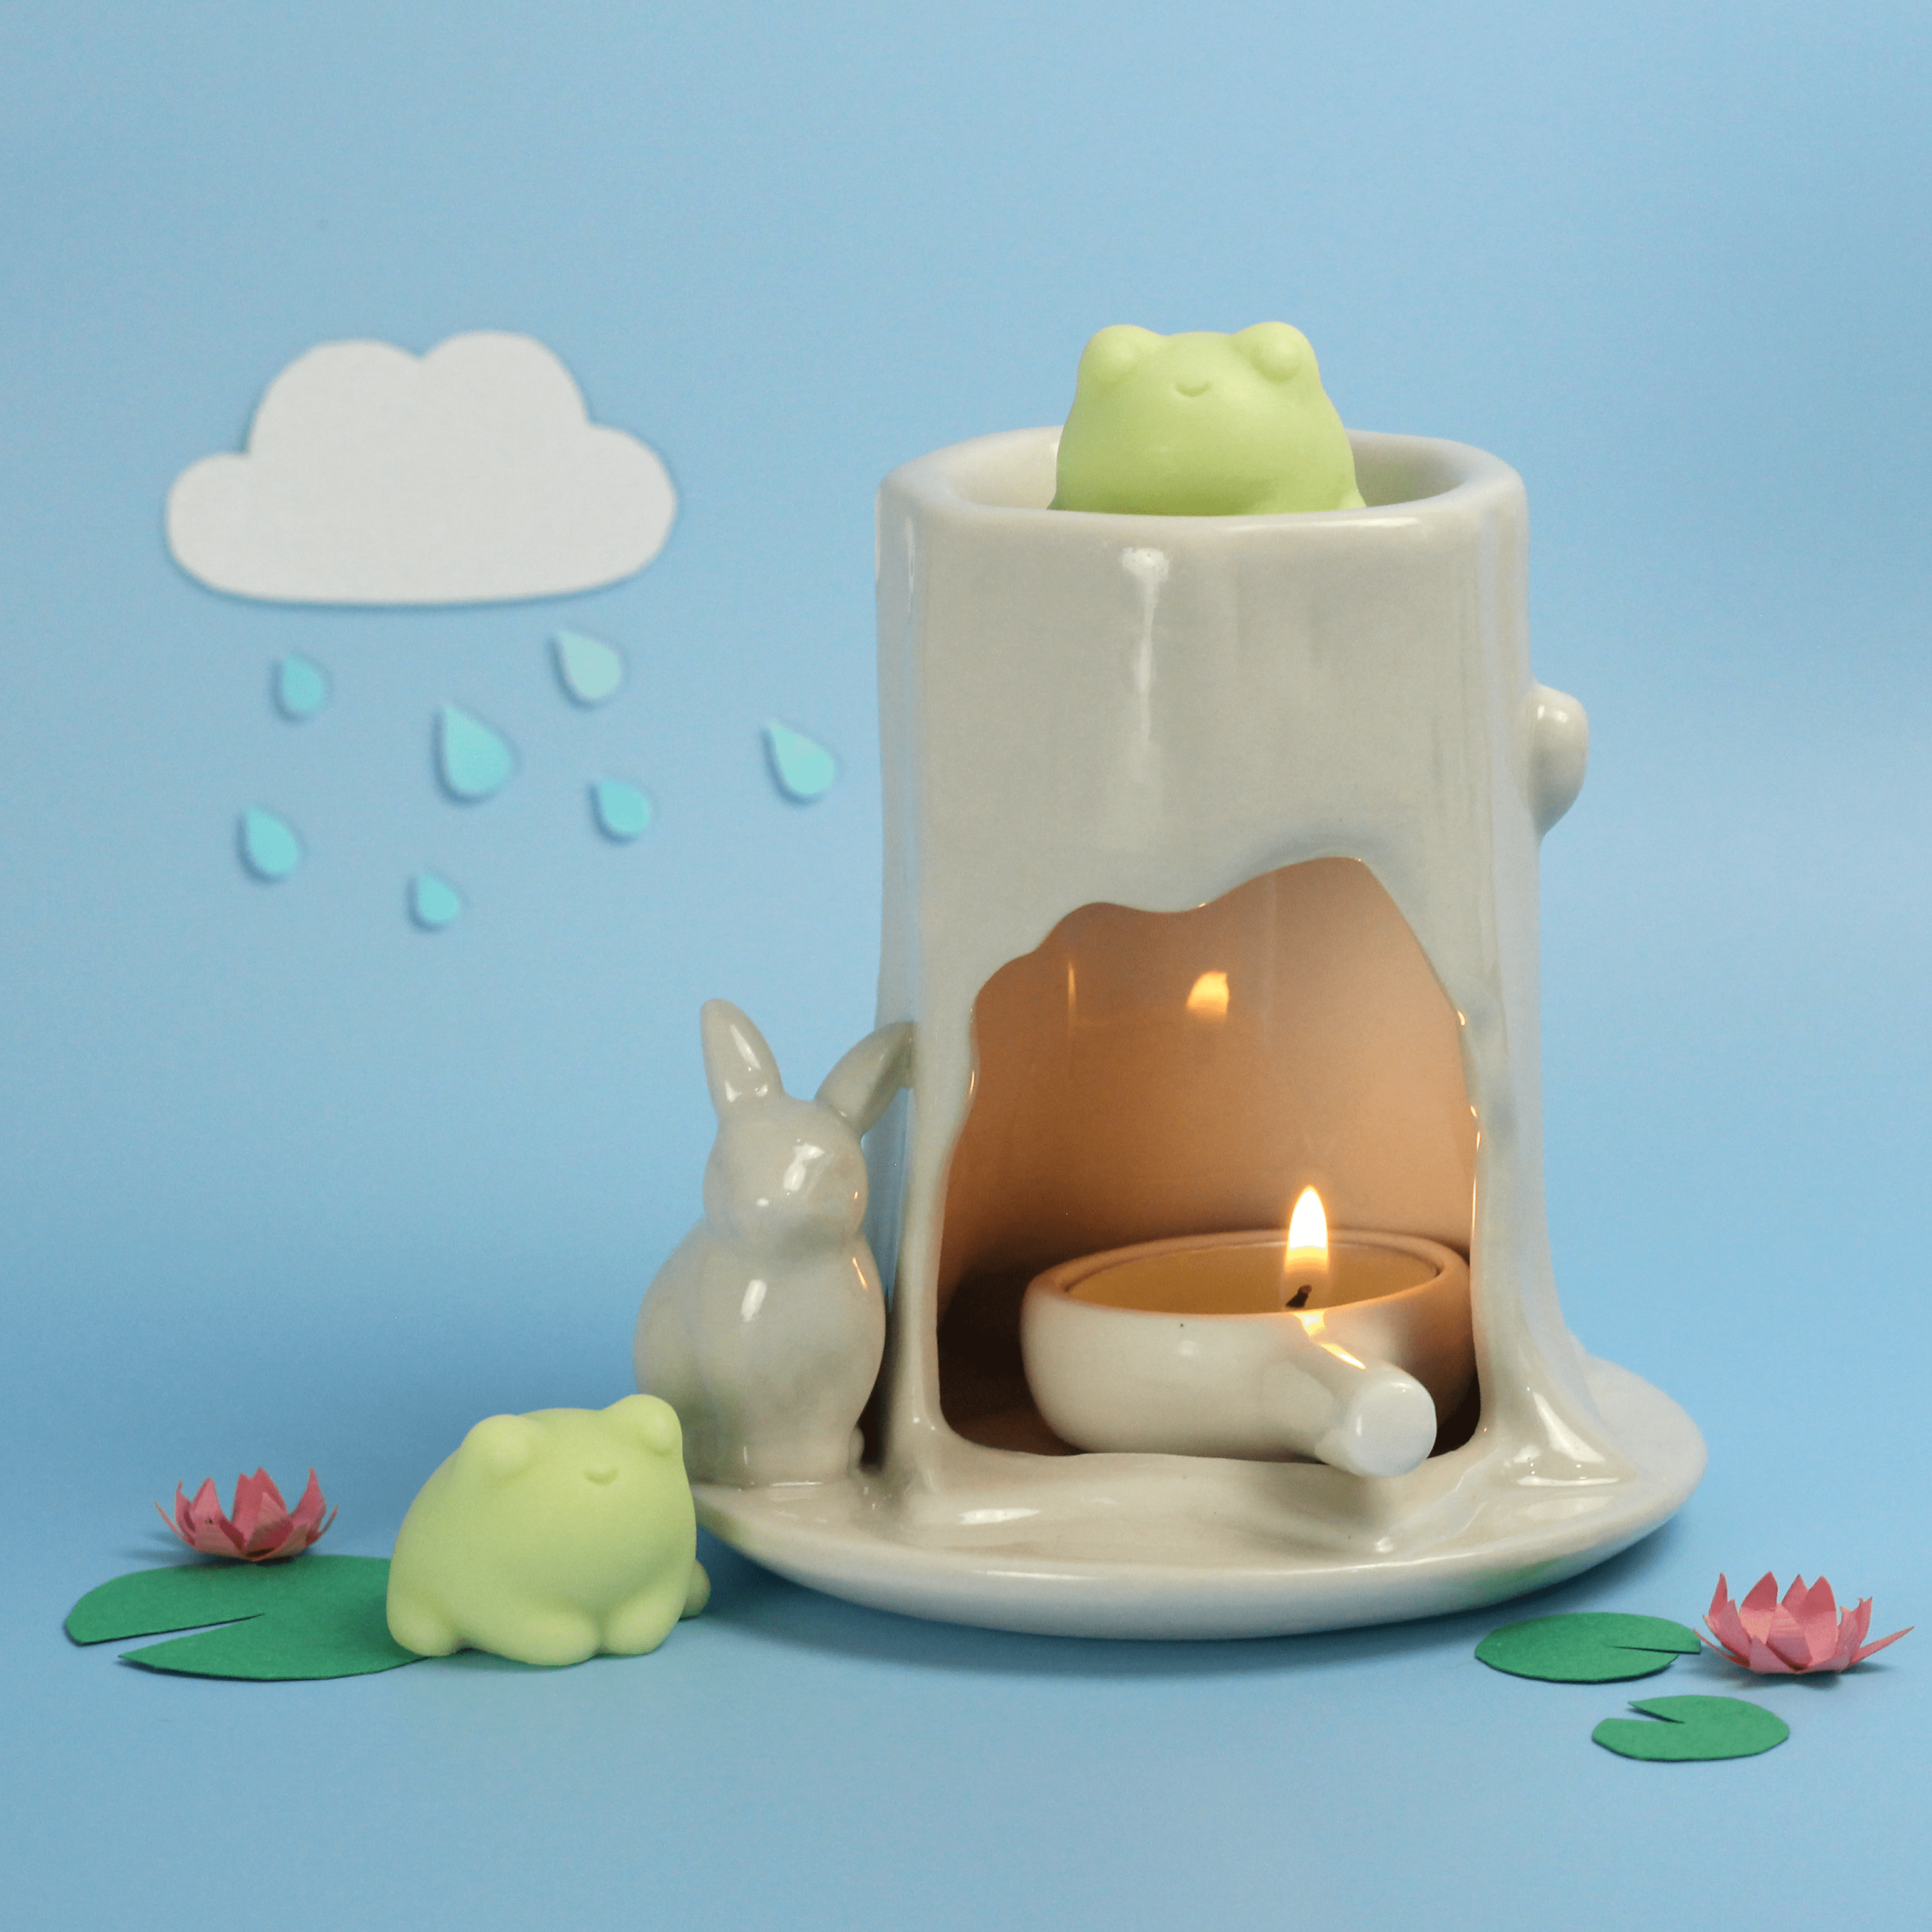 Froggy Wax Melt - Frolic Creations - Wax Melt - Cute Self Care - Kawaii Atheistic - Quirky Gift - Gift For Her